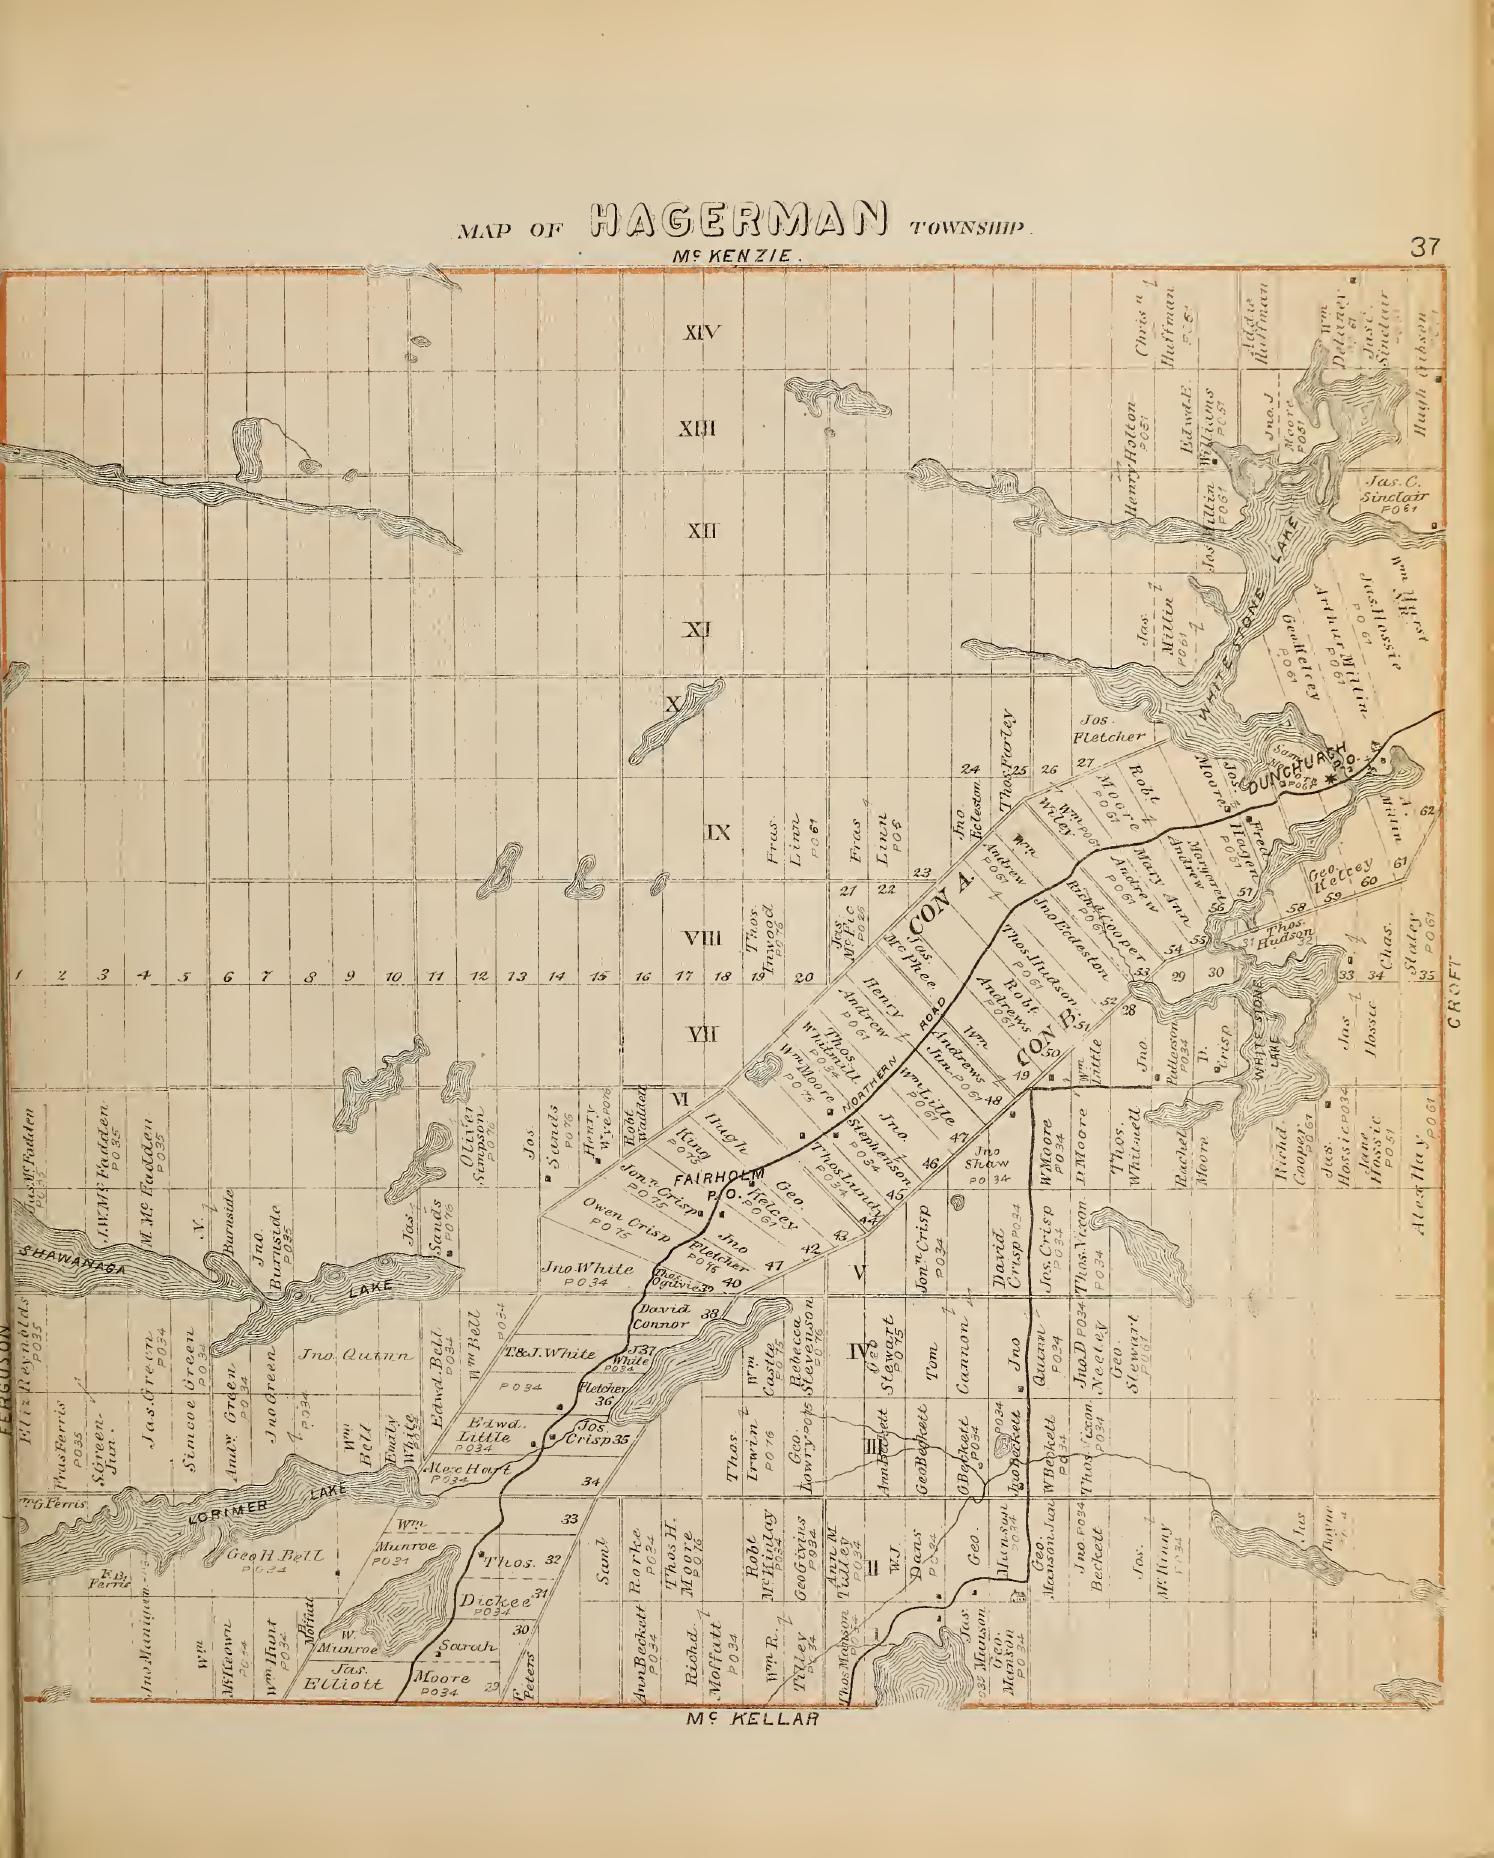 Historical map showing Concessions and Lots for hagerman